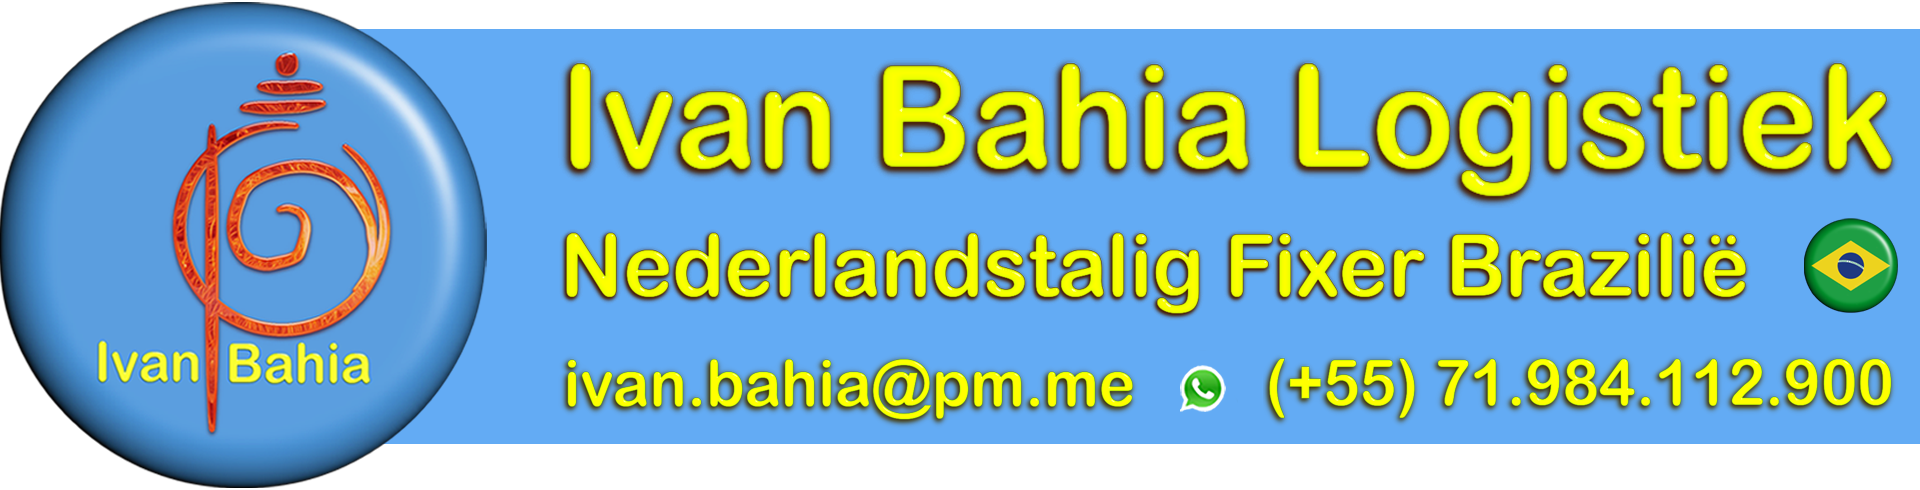 logo Ivan Bahia Logistics, travel & logistics organisation for business men, organisations, fixer audio-visual productions and research projects